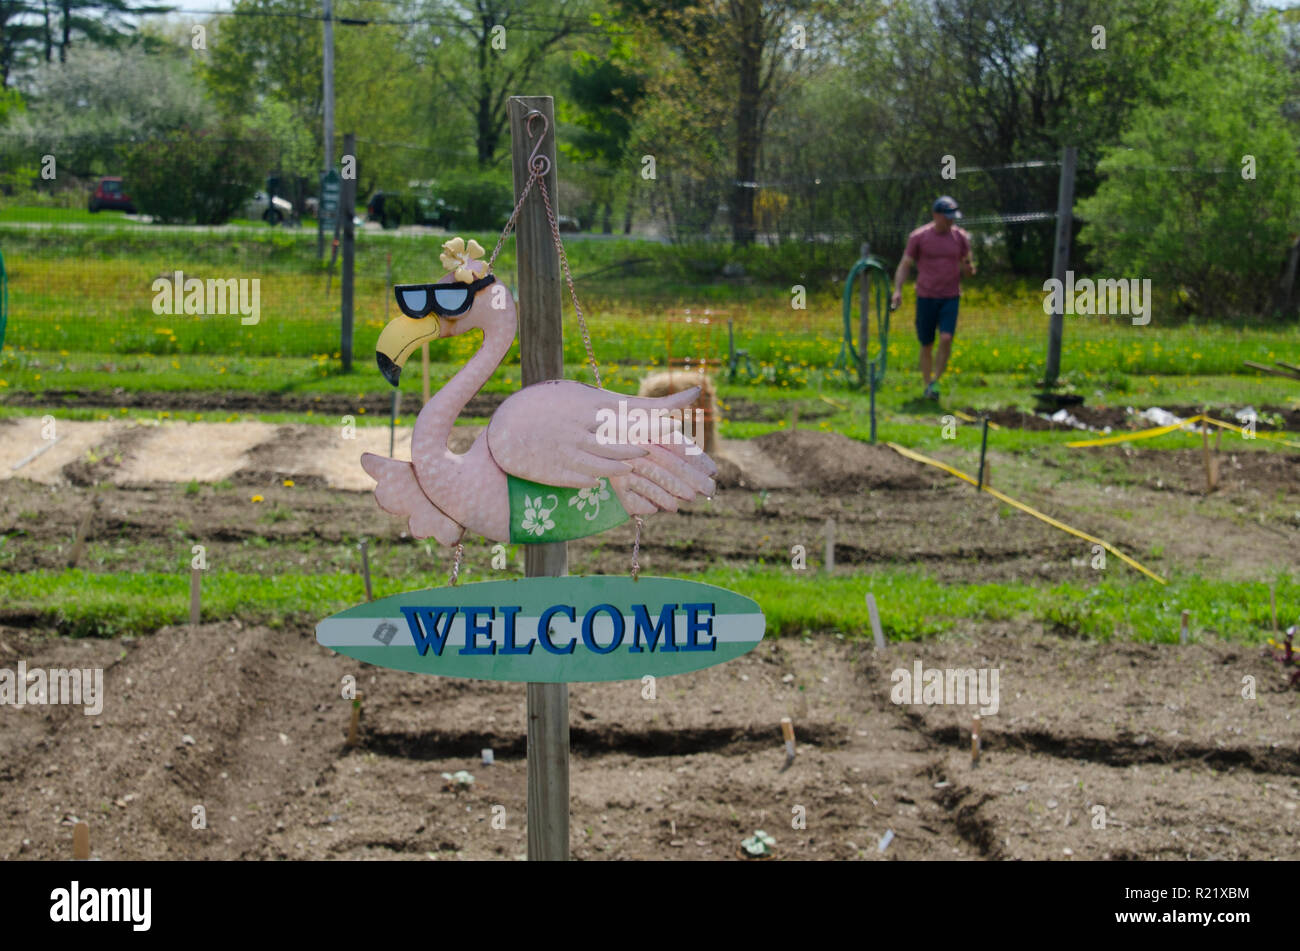 Sign with flamingo welcoming gardeners to the community garden, Maine, USA Stock Photo